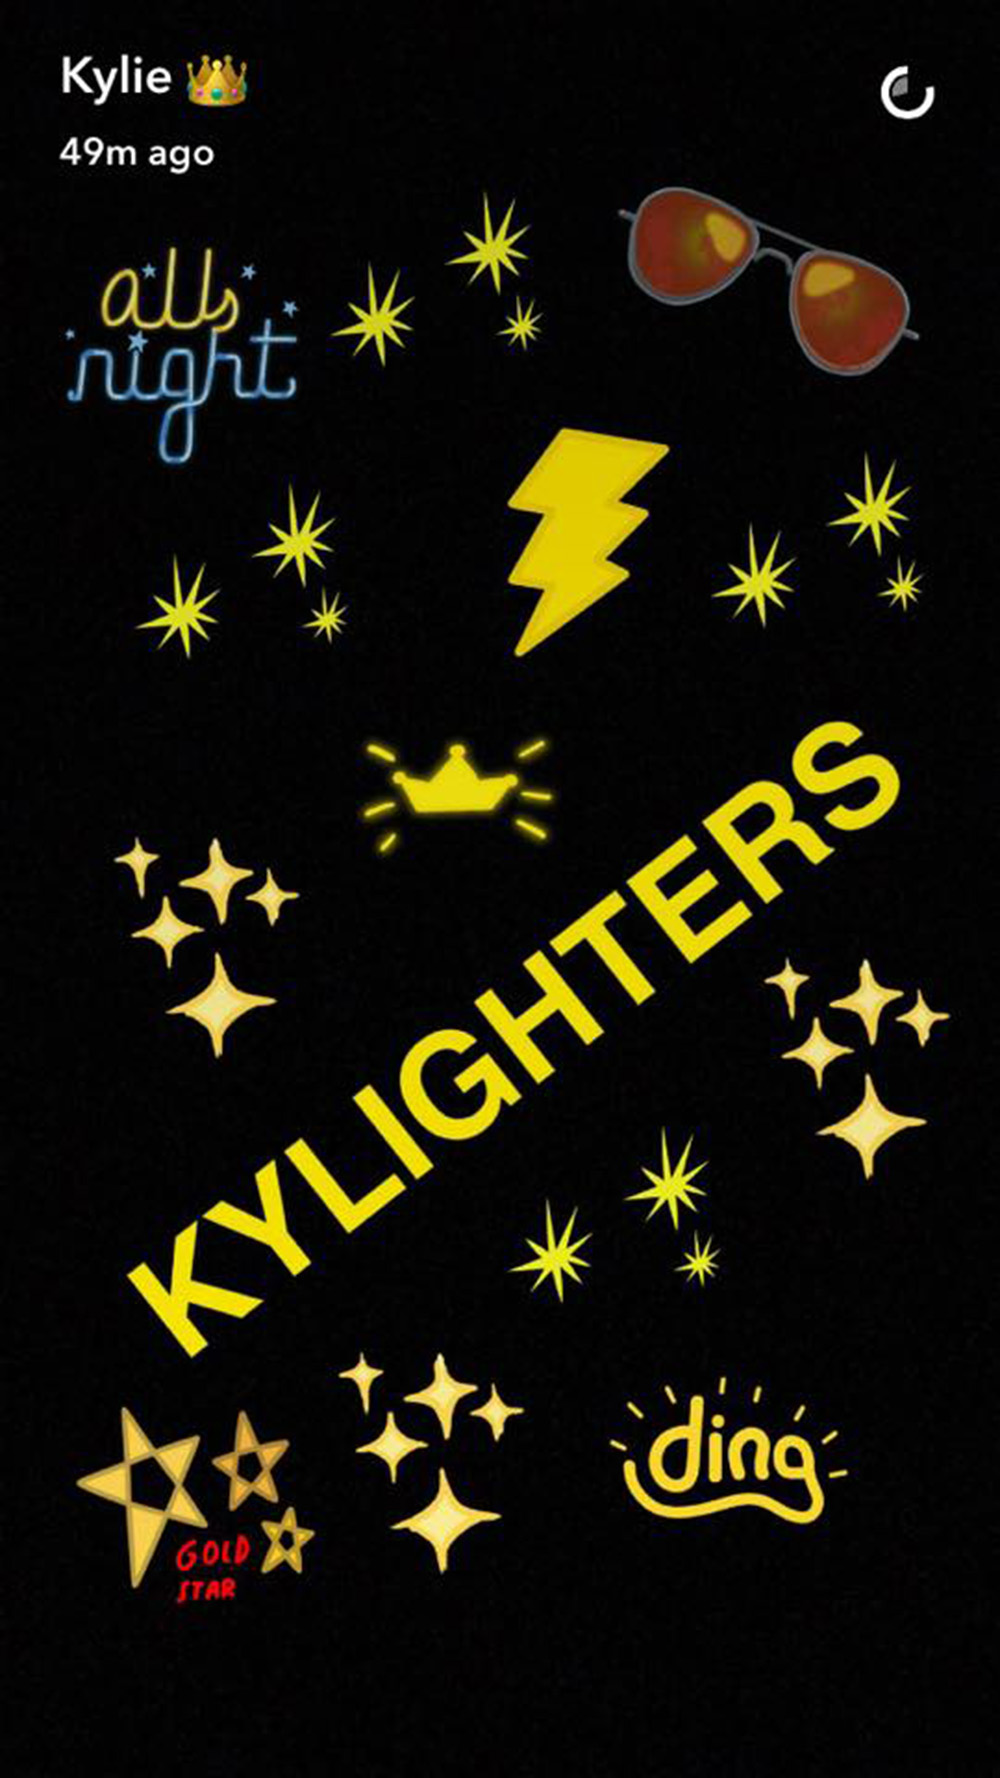 Kylie Jenner kylighters highlighters